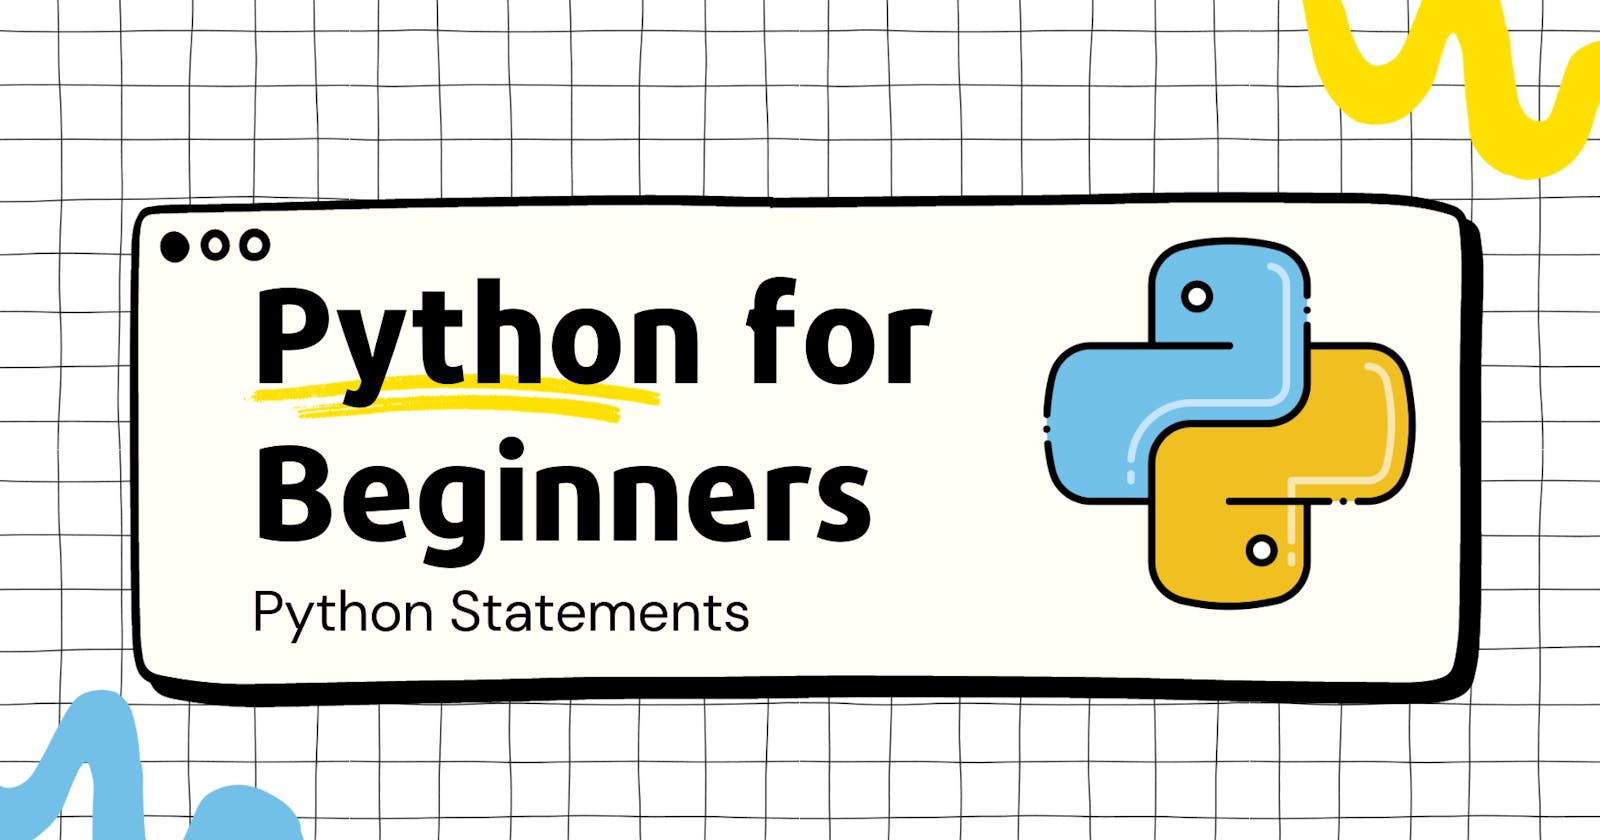 Python Statements for Beginners